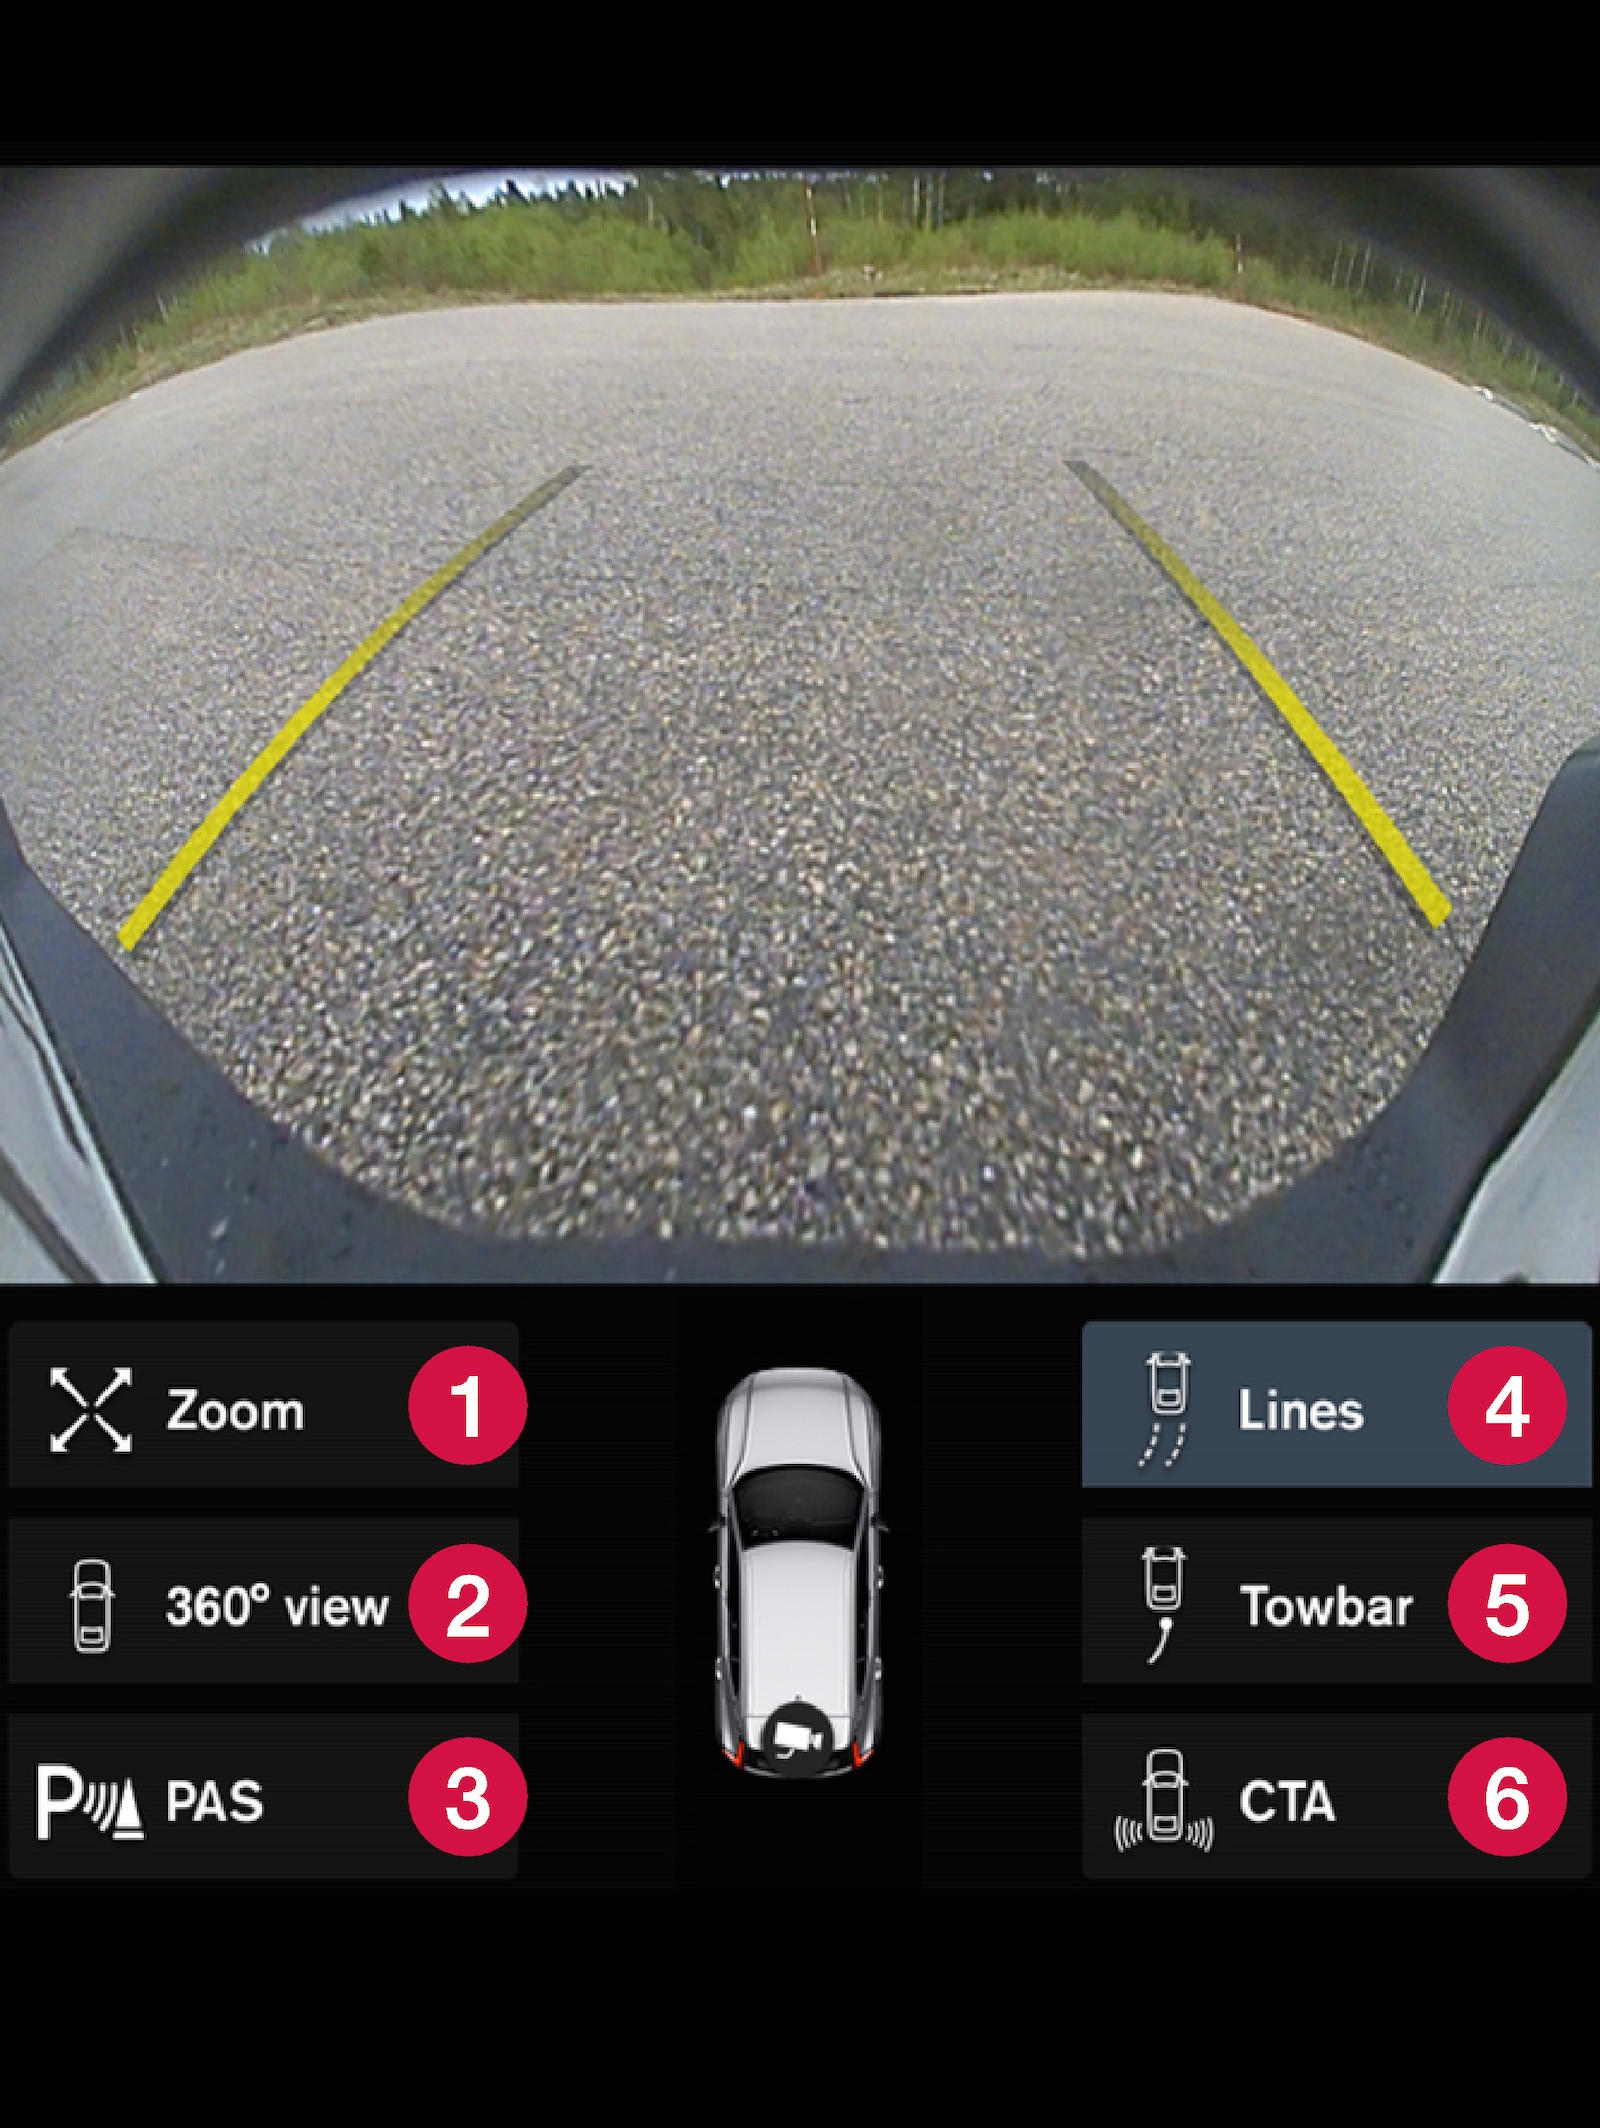 P5+6-1817 - Park Assist Camera, rear view with lines